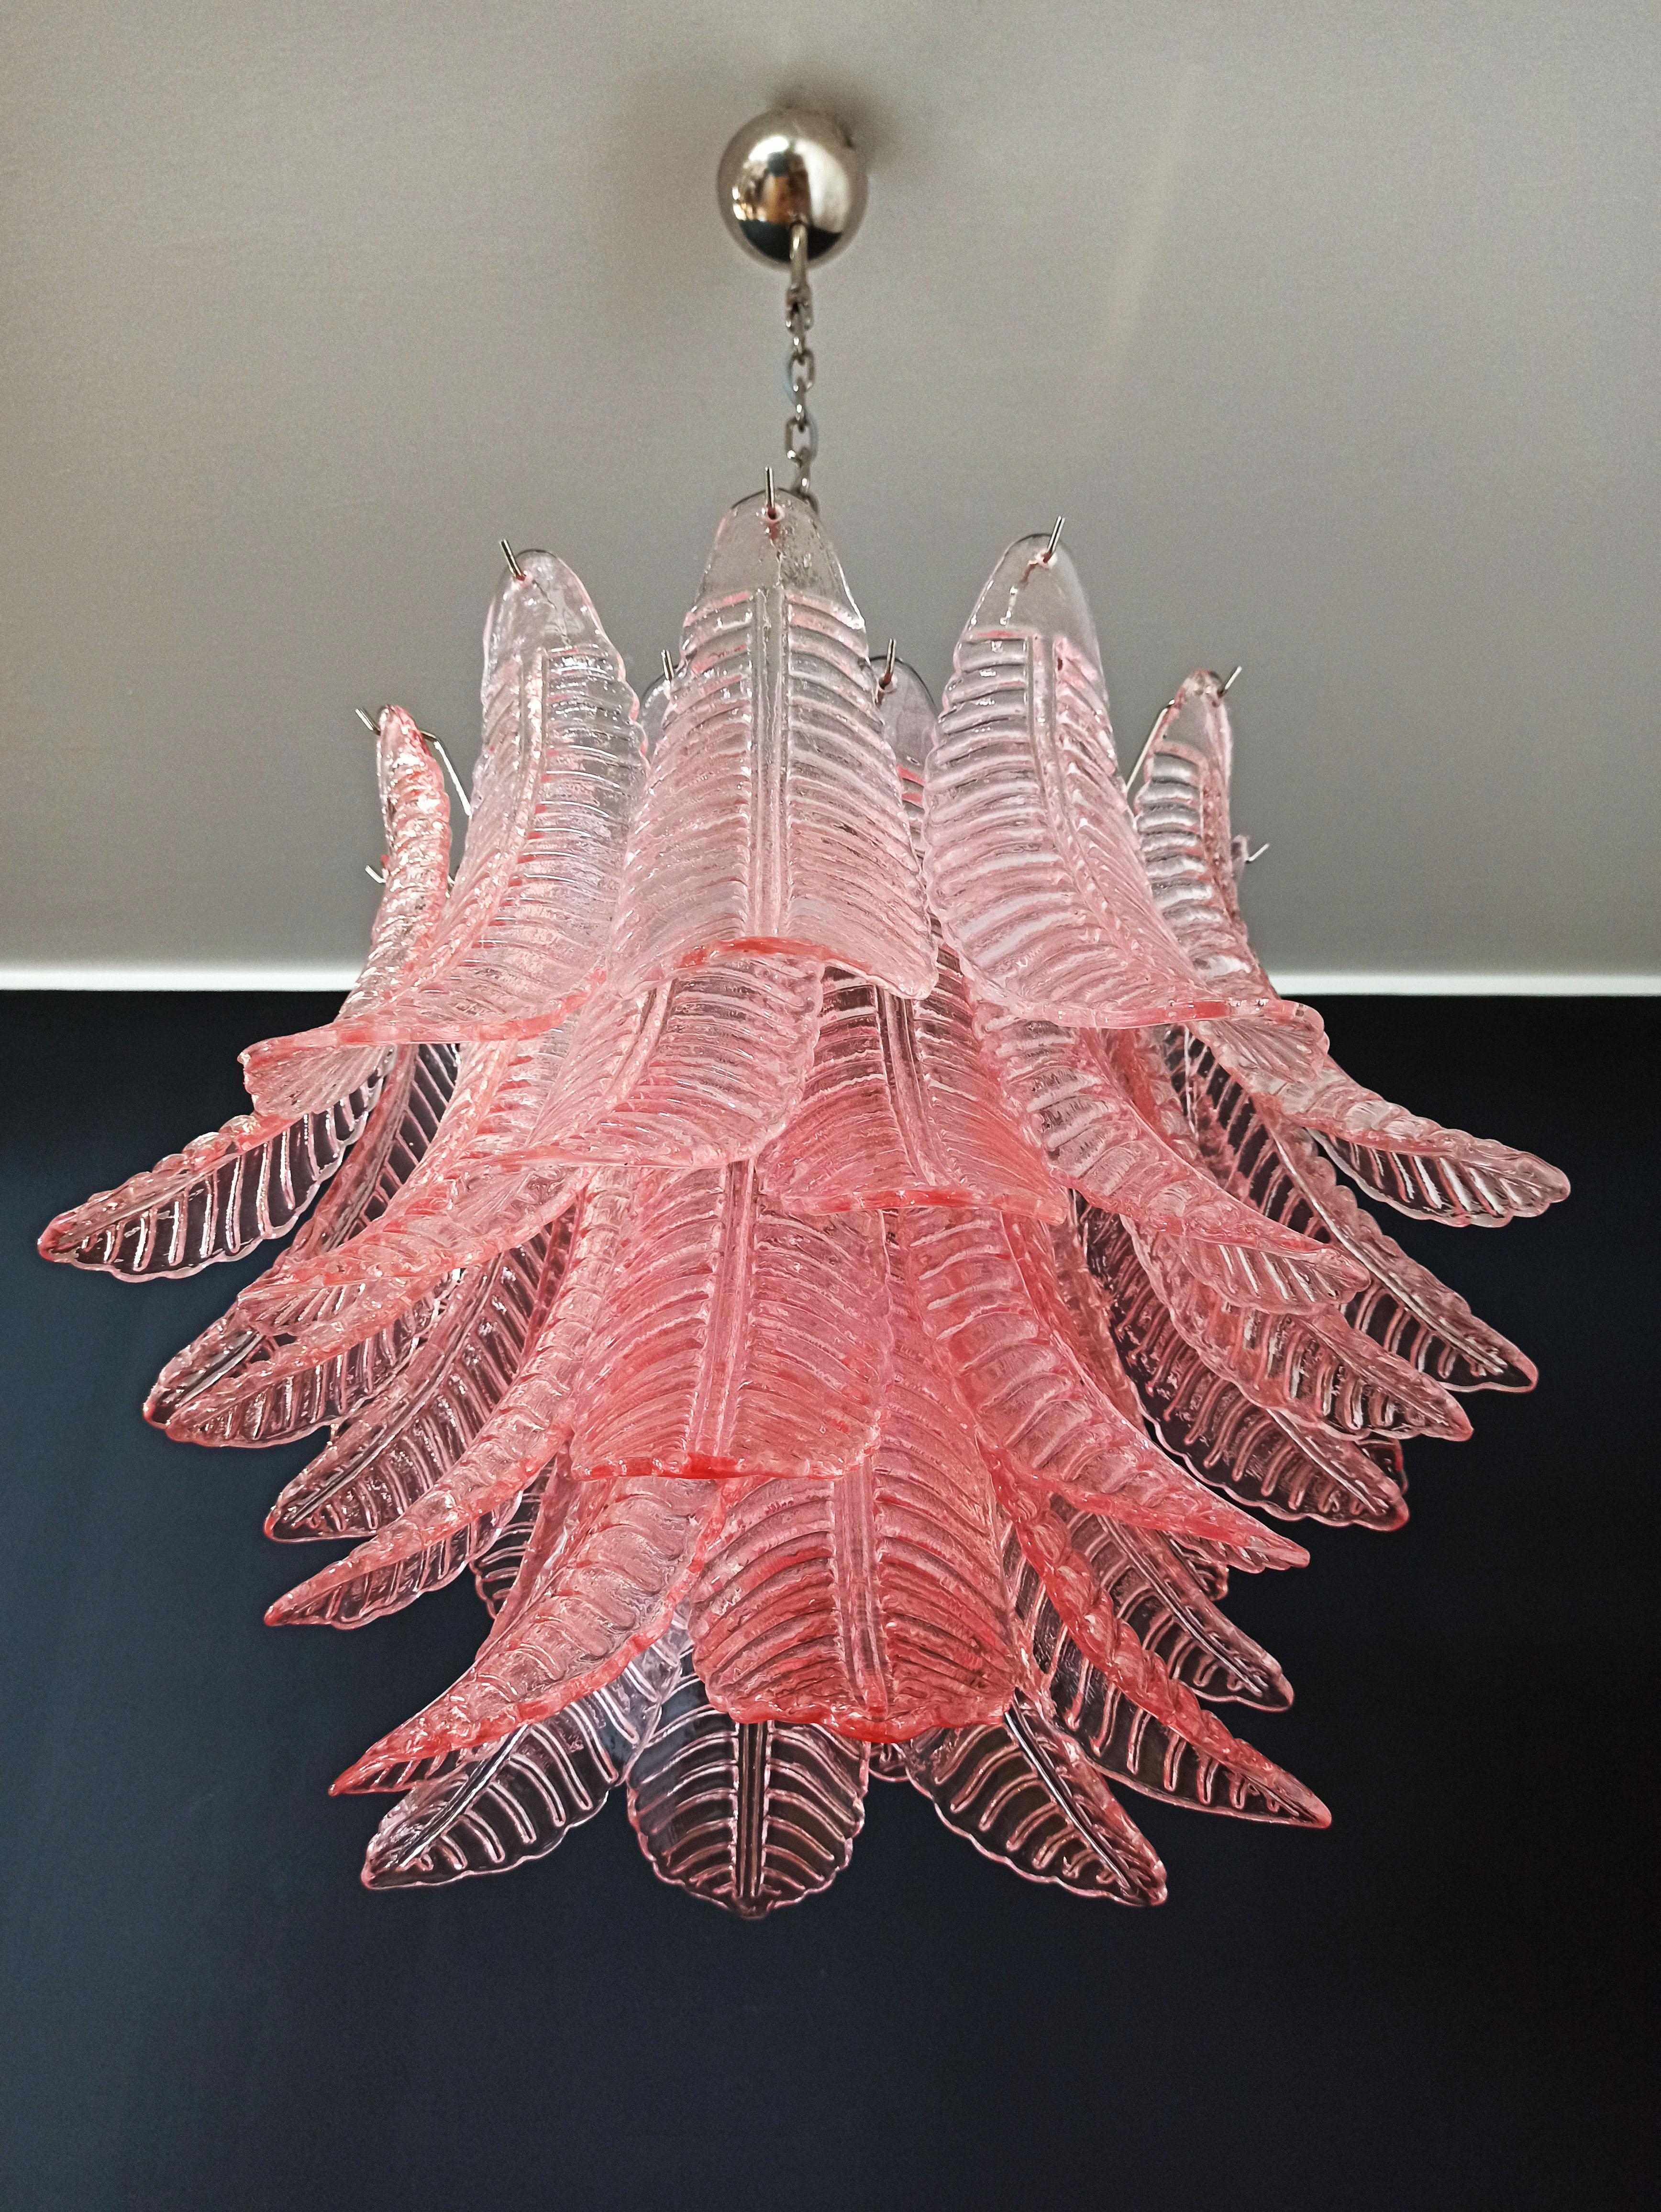 Beautiful Italian Murano chandelier composed of 36 splendid pink glasses that give a very elegant look. The glasses of this chandelier are real works of art.
Period: 1980s
Dimensions: 47.25 inches (120 cm) height with chain; 21.65 inches (55 cm)